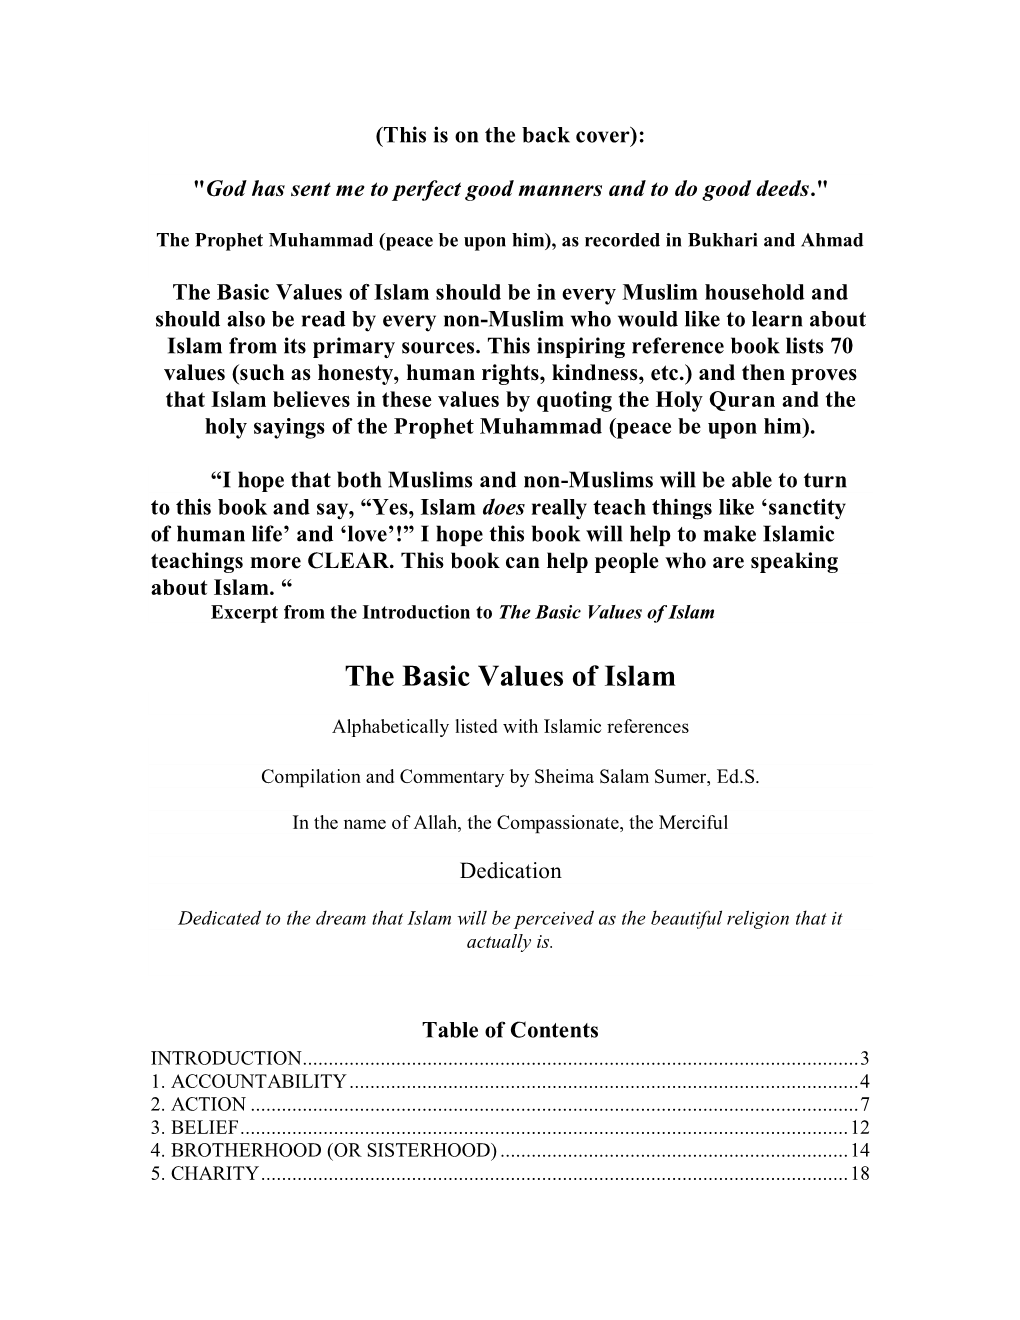 The Basic Values of Islam Should Be in Every Muslim Household and Should Also Be Read by Every Non-Muslim Who Would Like to Learn About Islam from Its Primary Sources